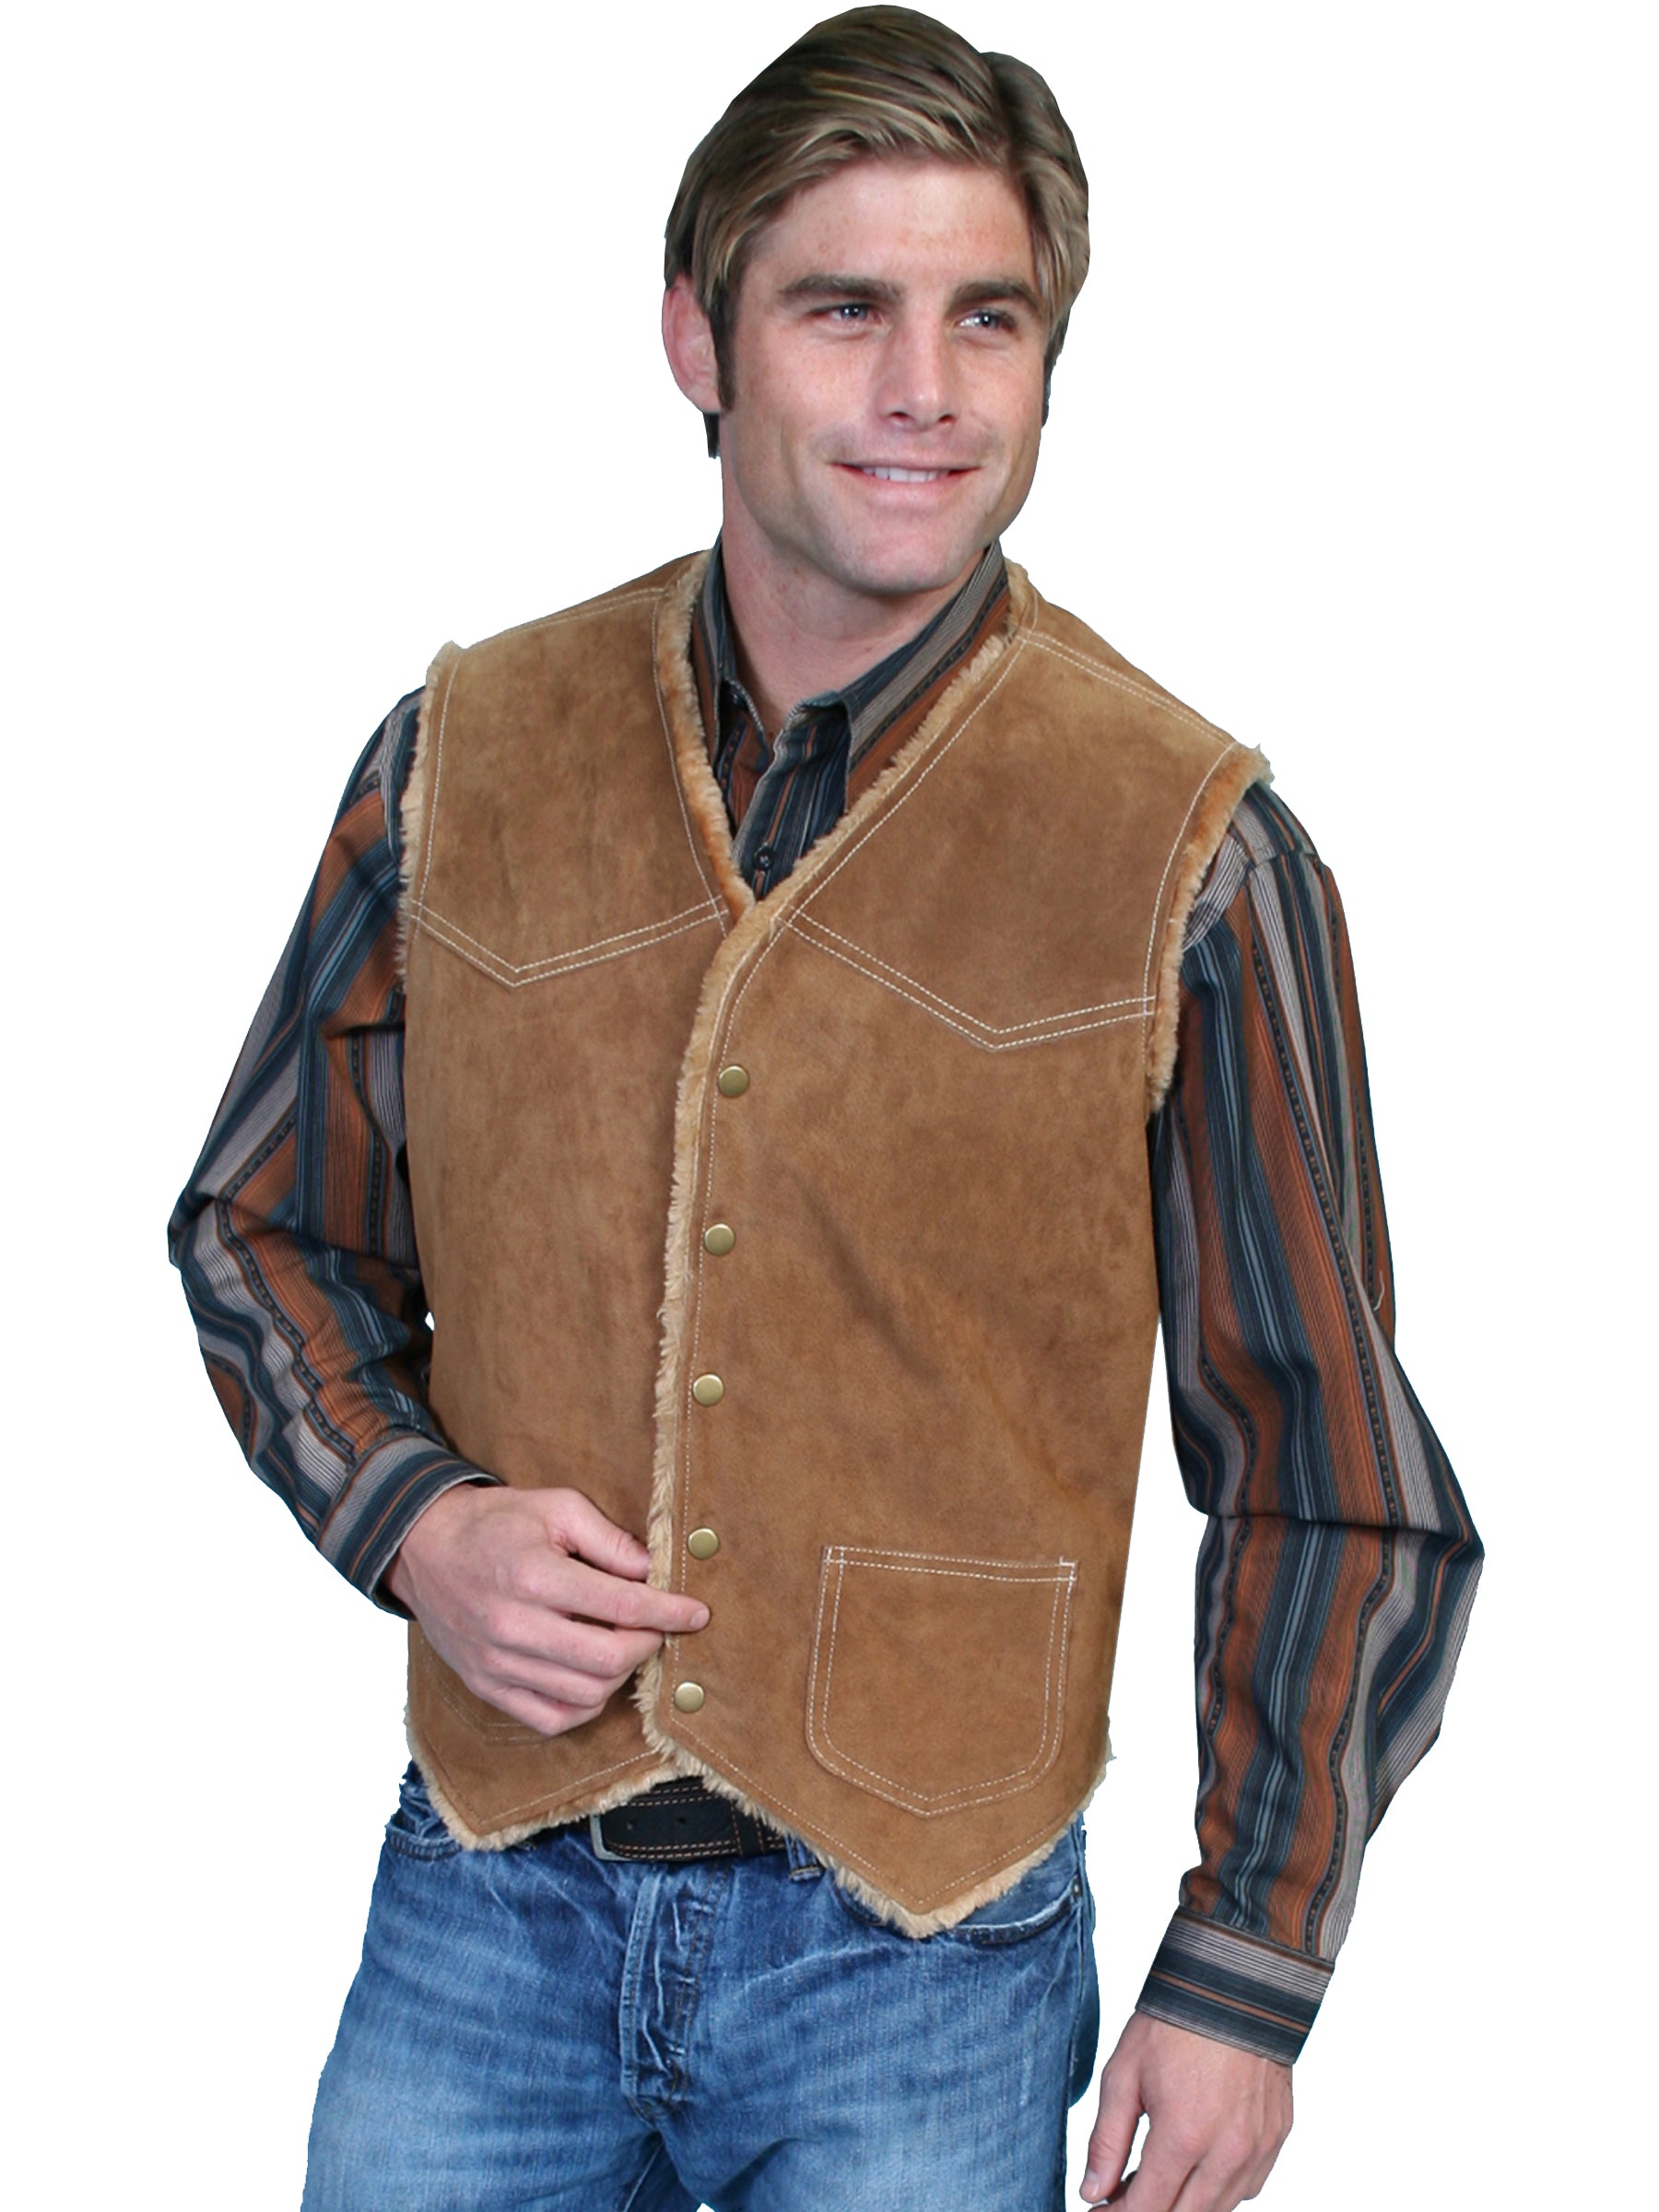 Scully Men's Old West Suede Hunting Vest with Faux Fur Shearling Lining Cafe Brown Front